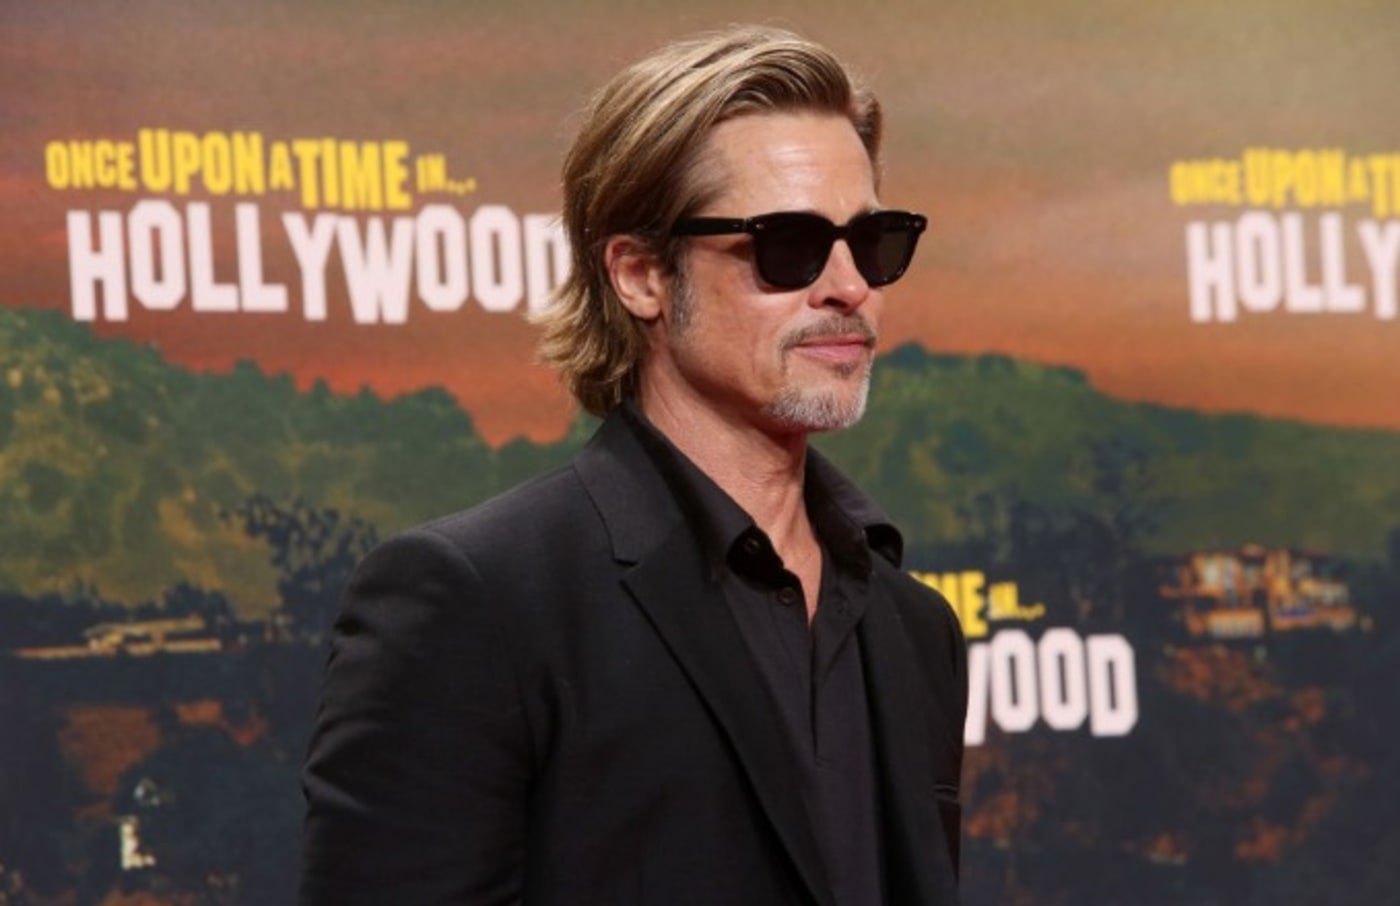 Brad Pitt's short hair in "Once Upon a Time in Hollywood" - wide 2